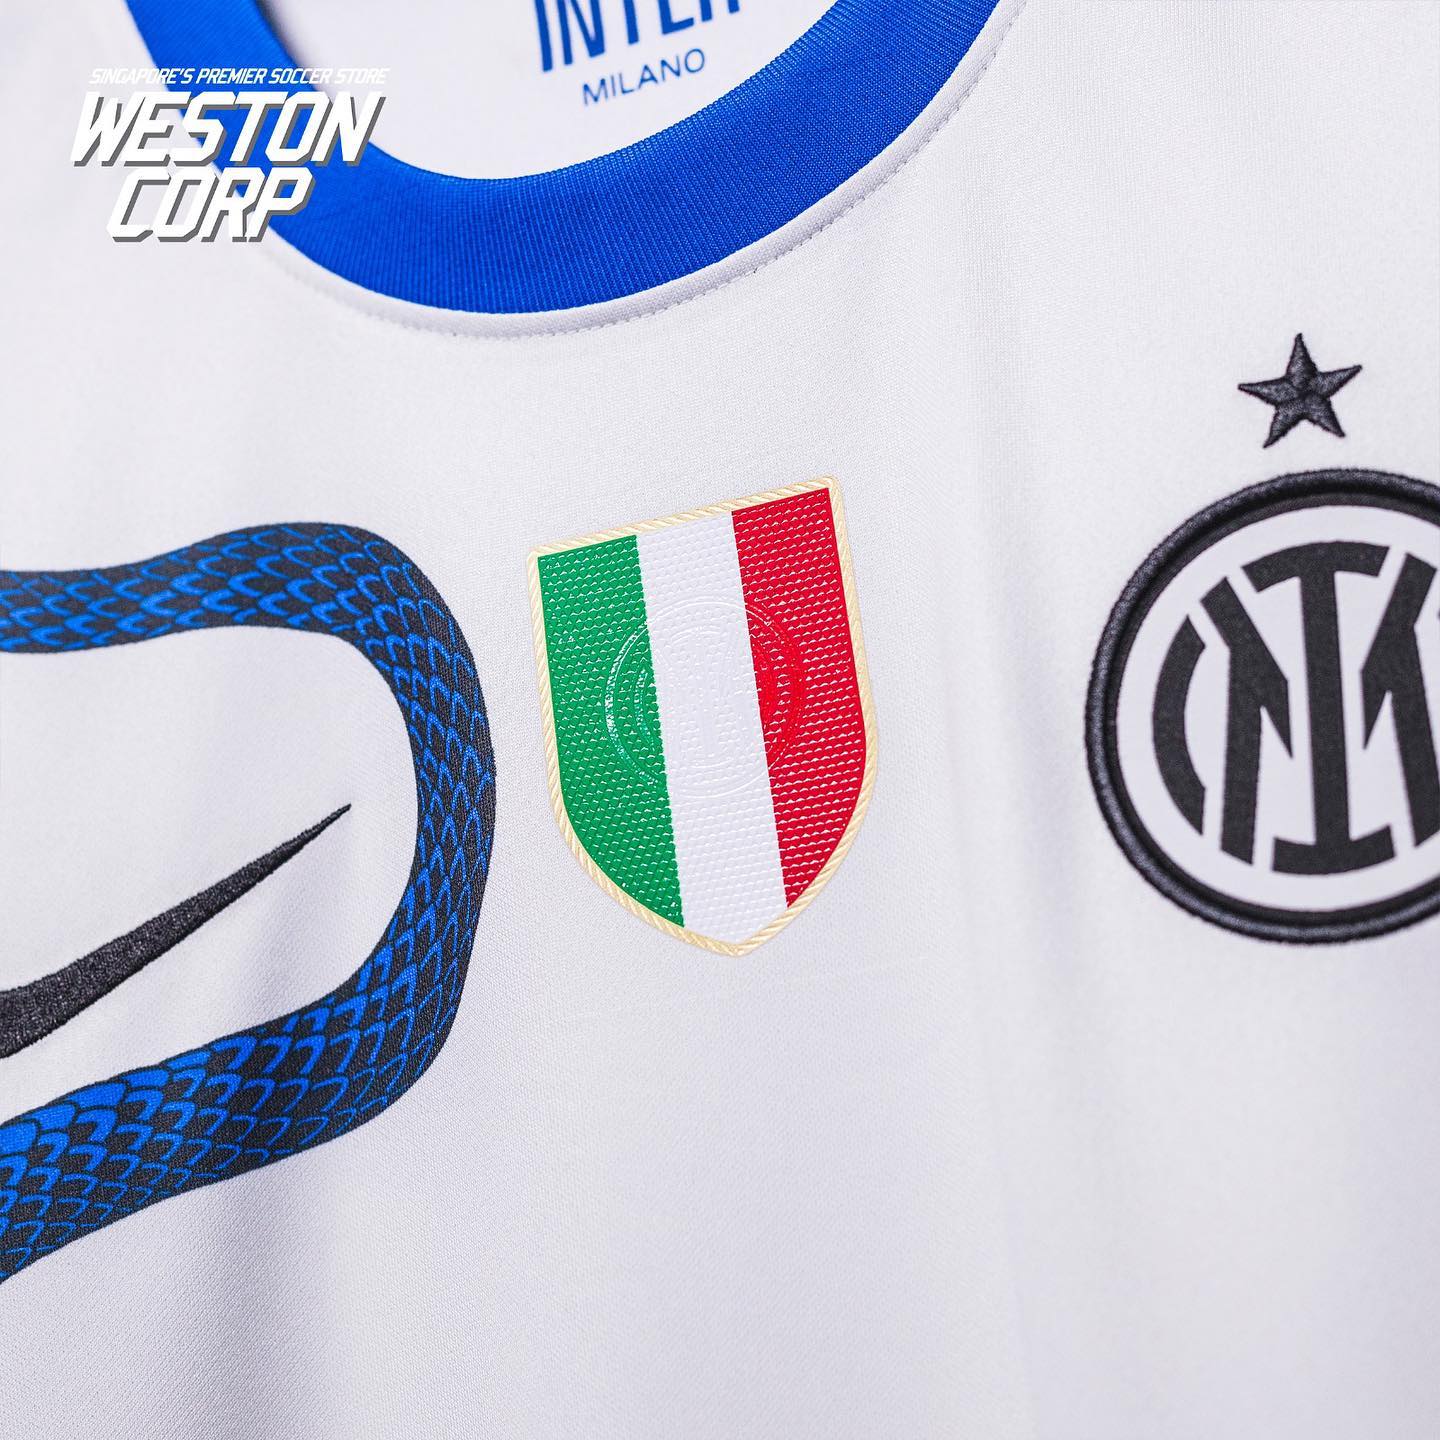 Inter 21-22 Away Kit Font Features Snake Design - Footy Headlines